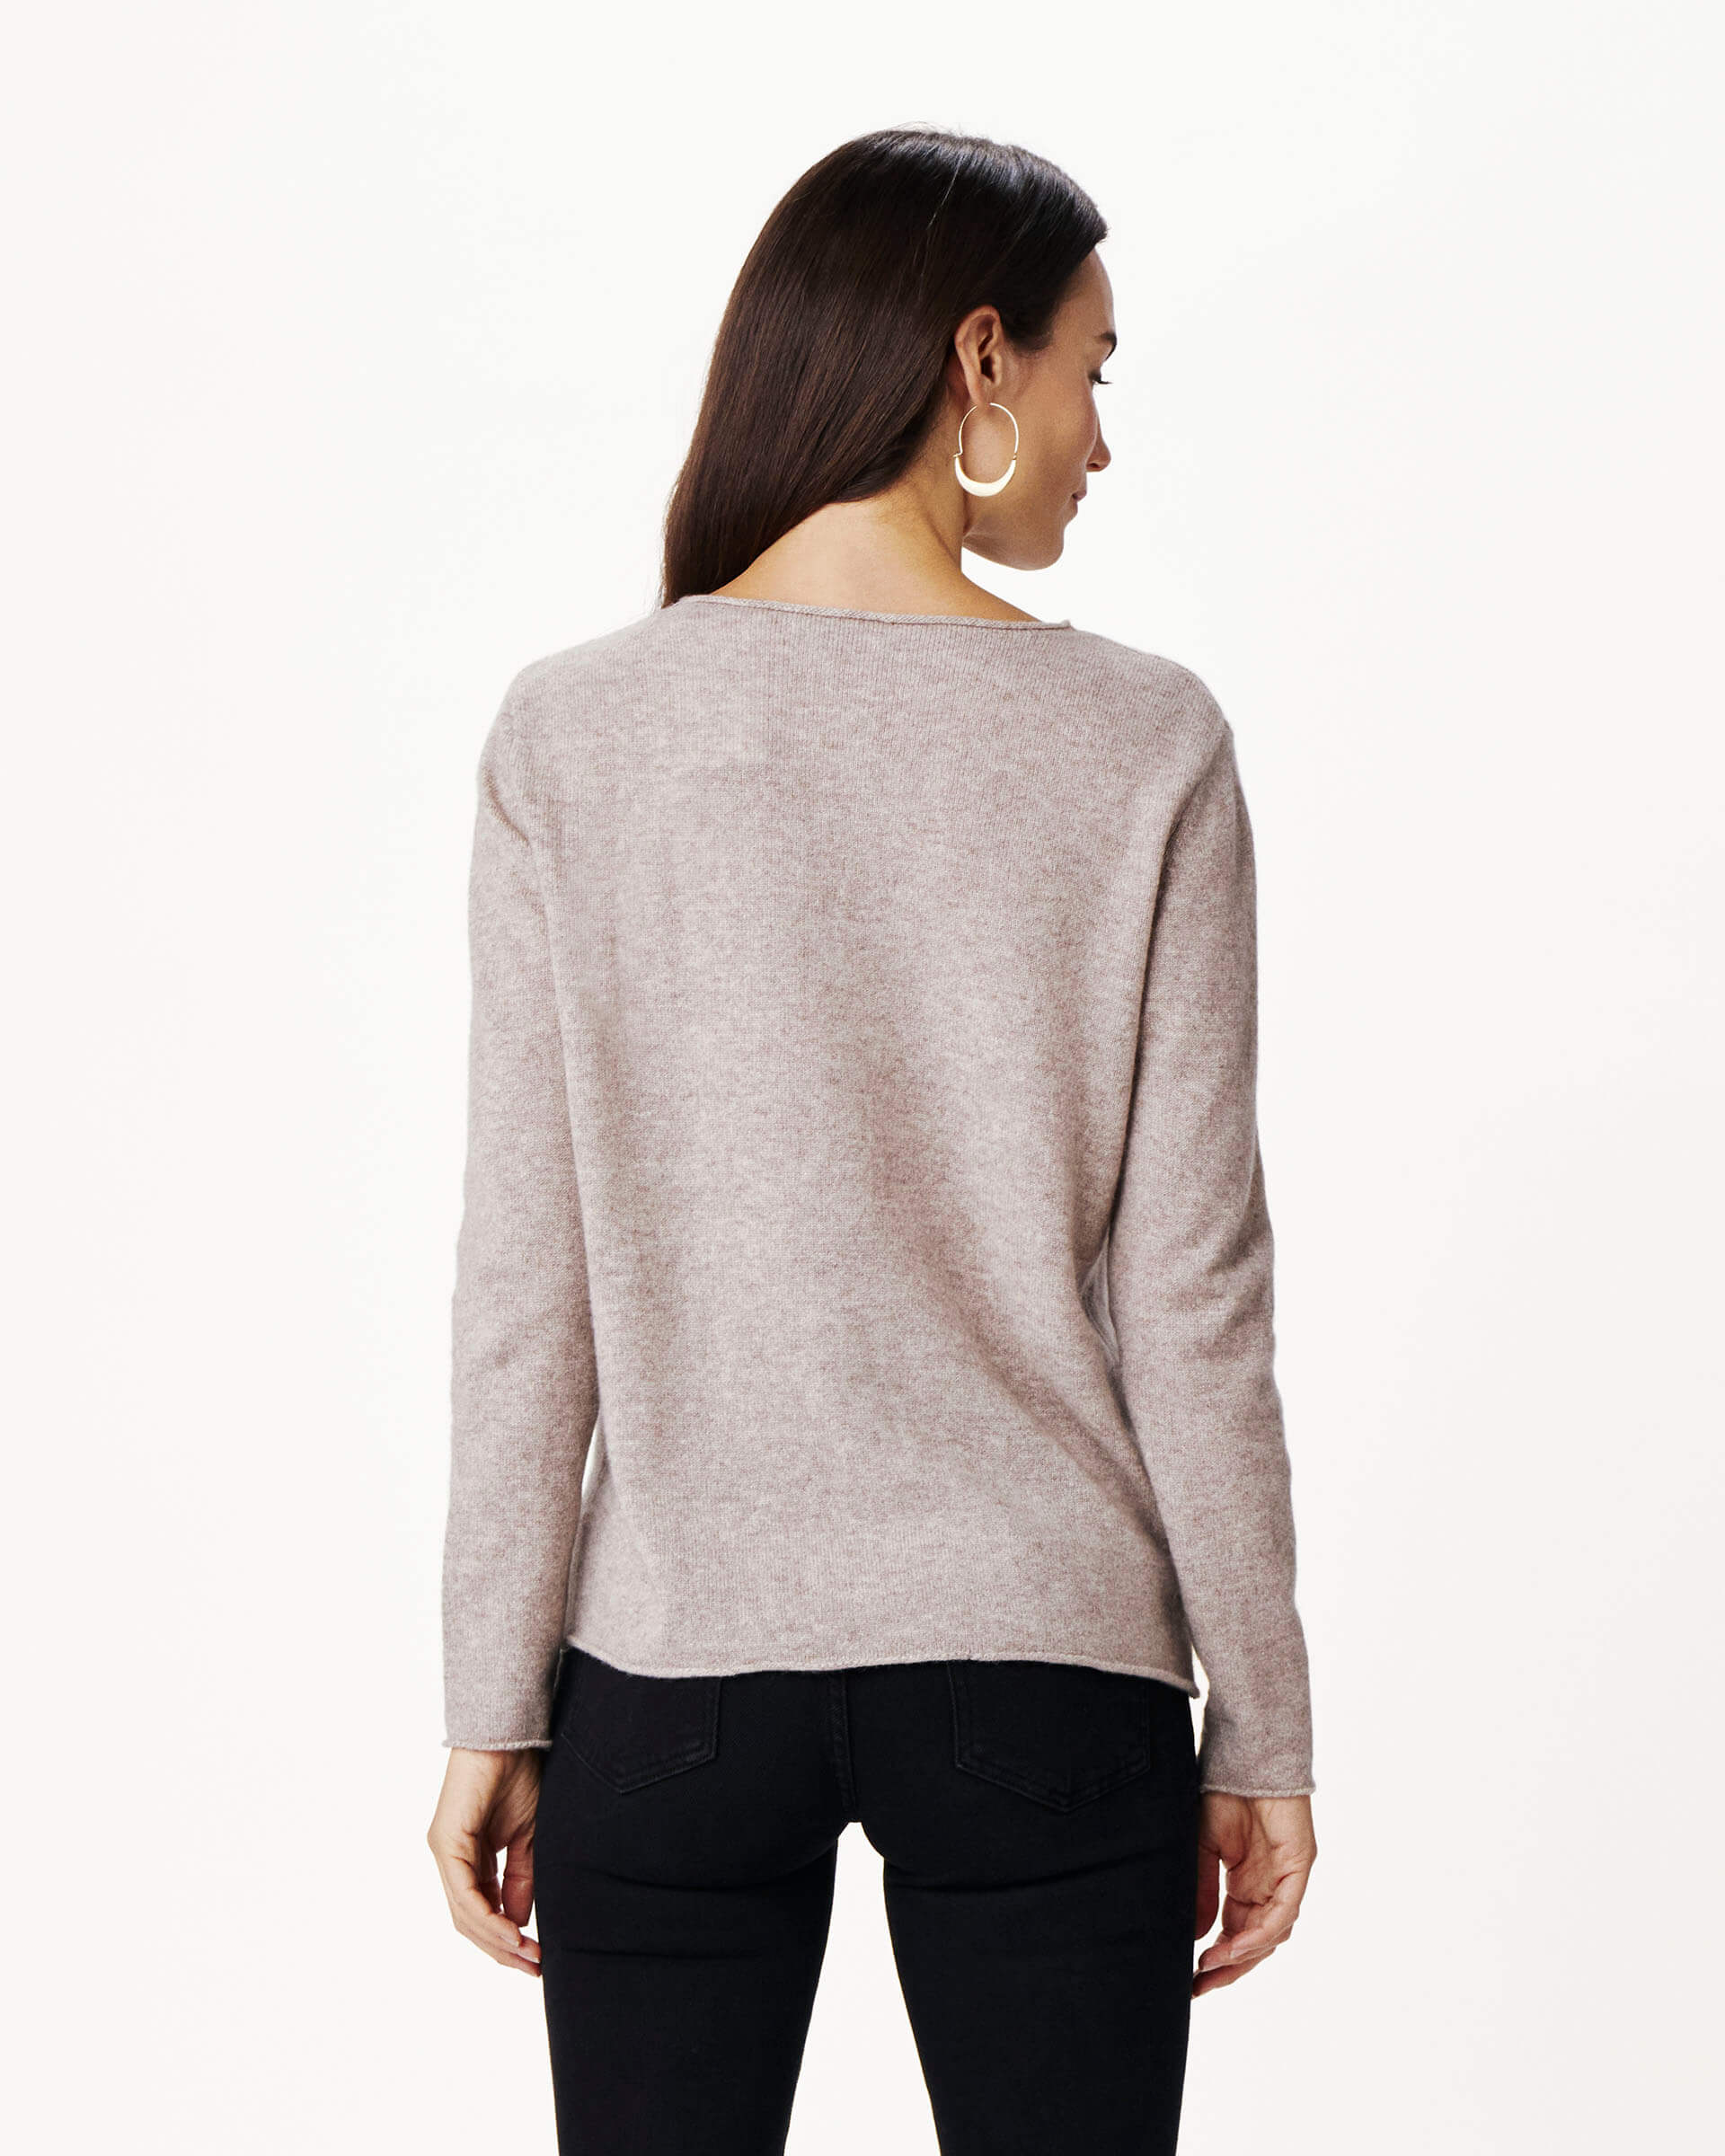 Women's Beige Taupe Fitted Cashmere Crewneck Rolled Hem Pullover Sweater Rear View